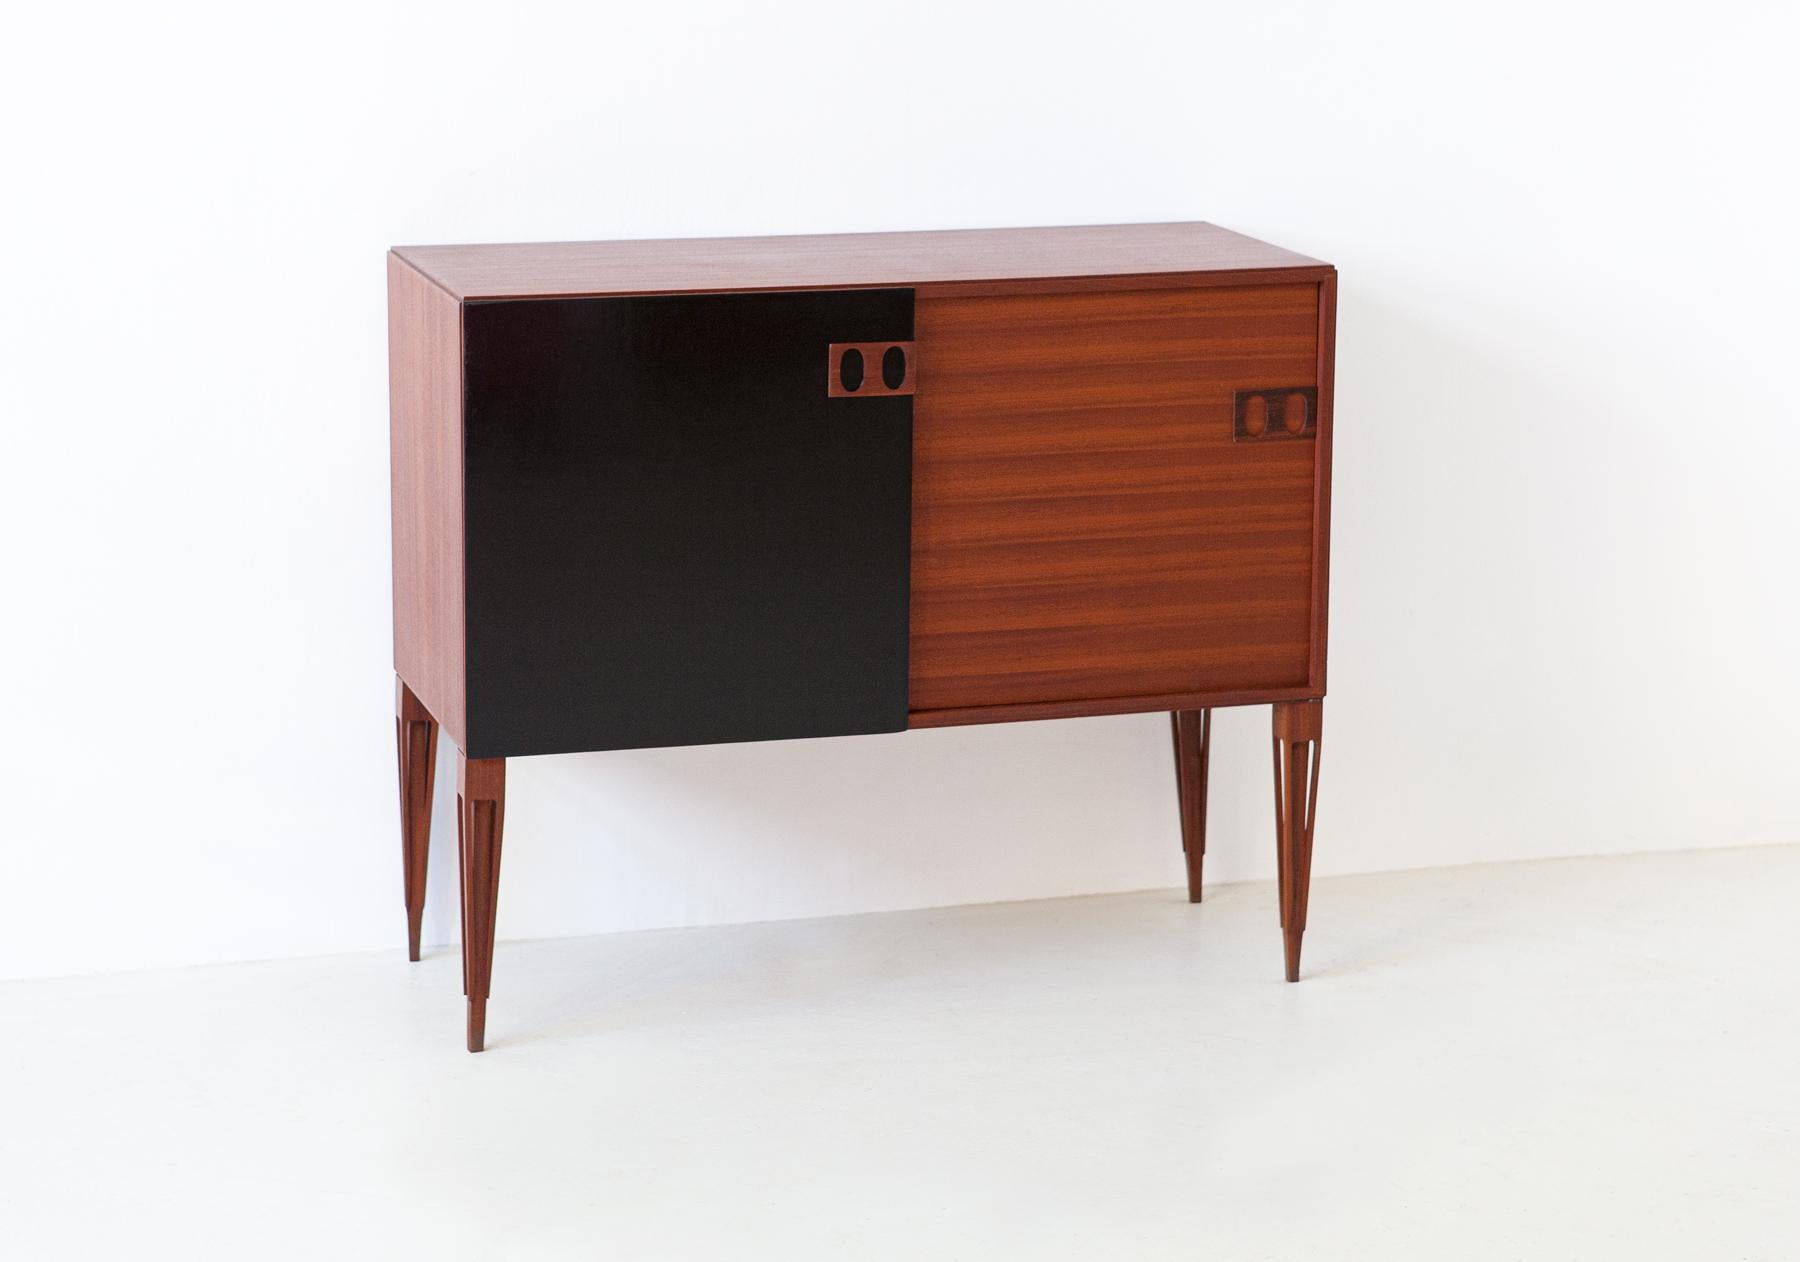 Italian modern credenza manufactured in Italy by Fratelli Proserpio during the 1950s.

This mahogany cabinet has two sliding doors one of the two hand lacquered with black shellac.

Fully restored.

The ''PPP'' company brand  present on the legs.